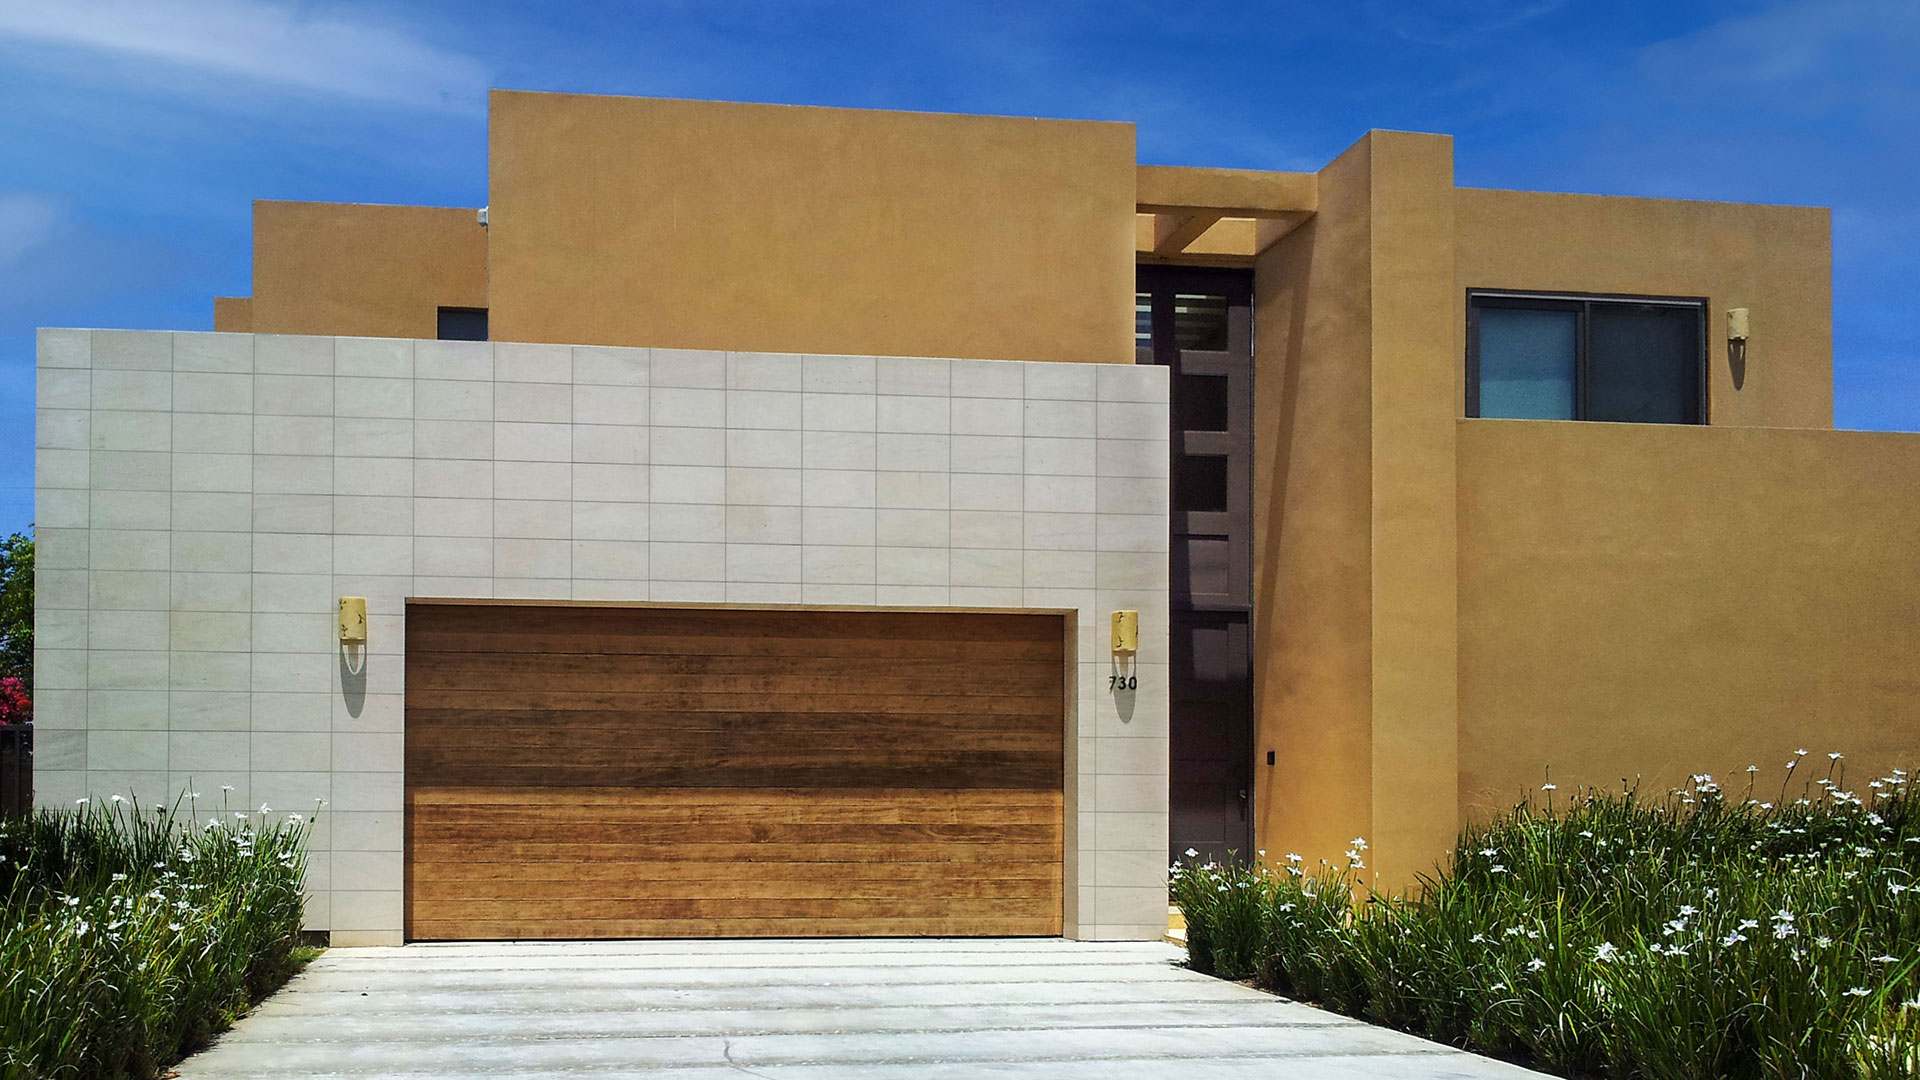 Nadia Neo Planks natural stone thin veneer installed on exterior wall of home around garage